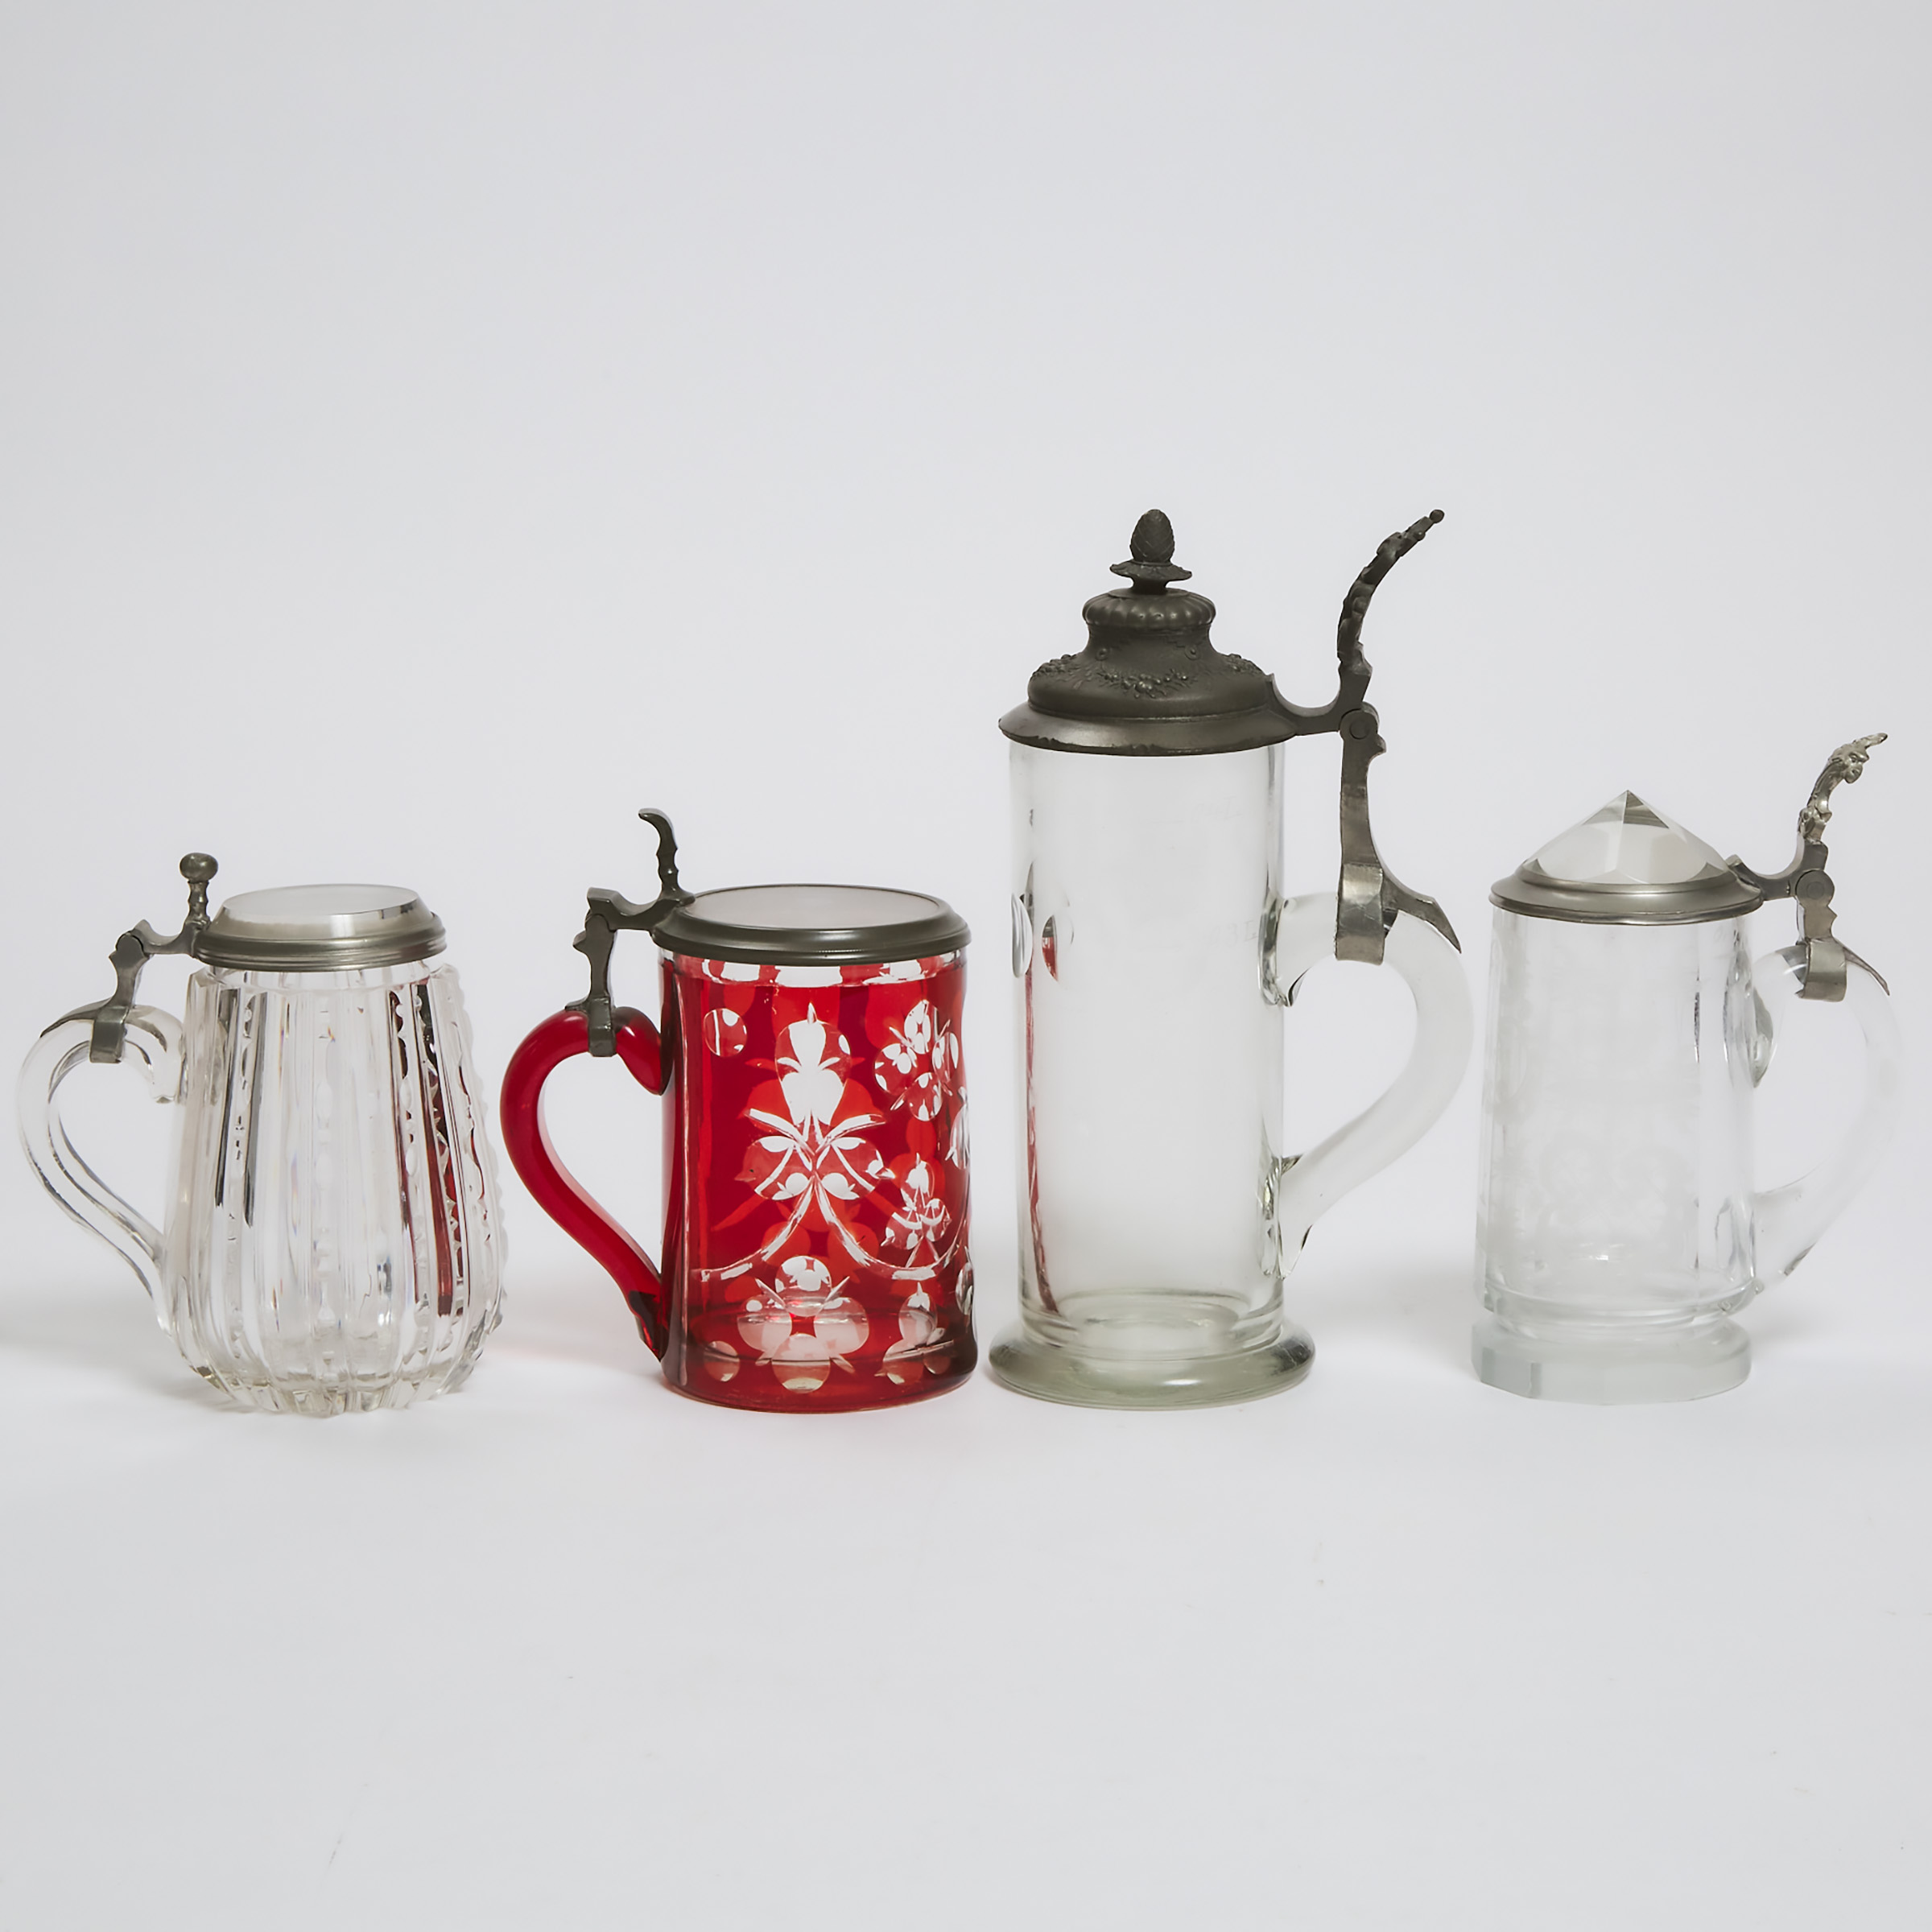 Four Bohemian Pewter Mounted Cut Glass Tankards, second half of the 19th century